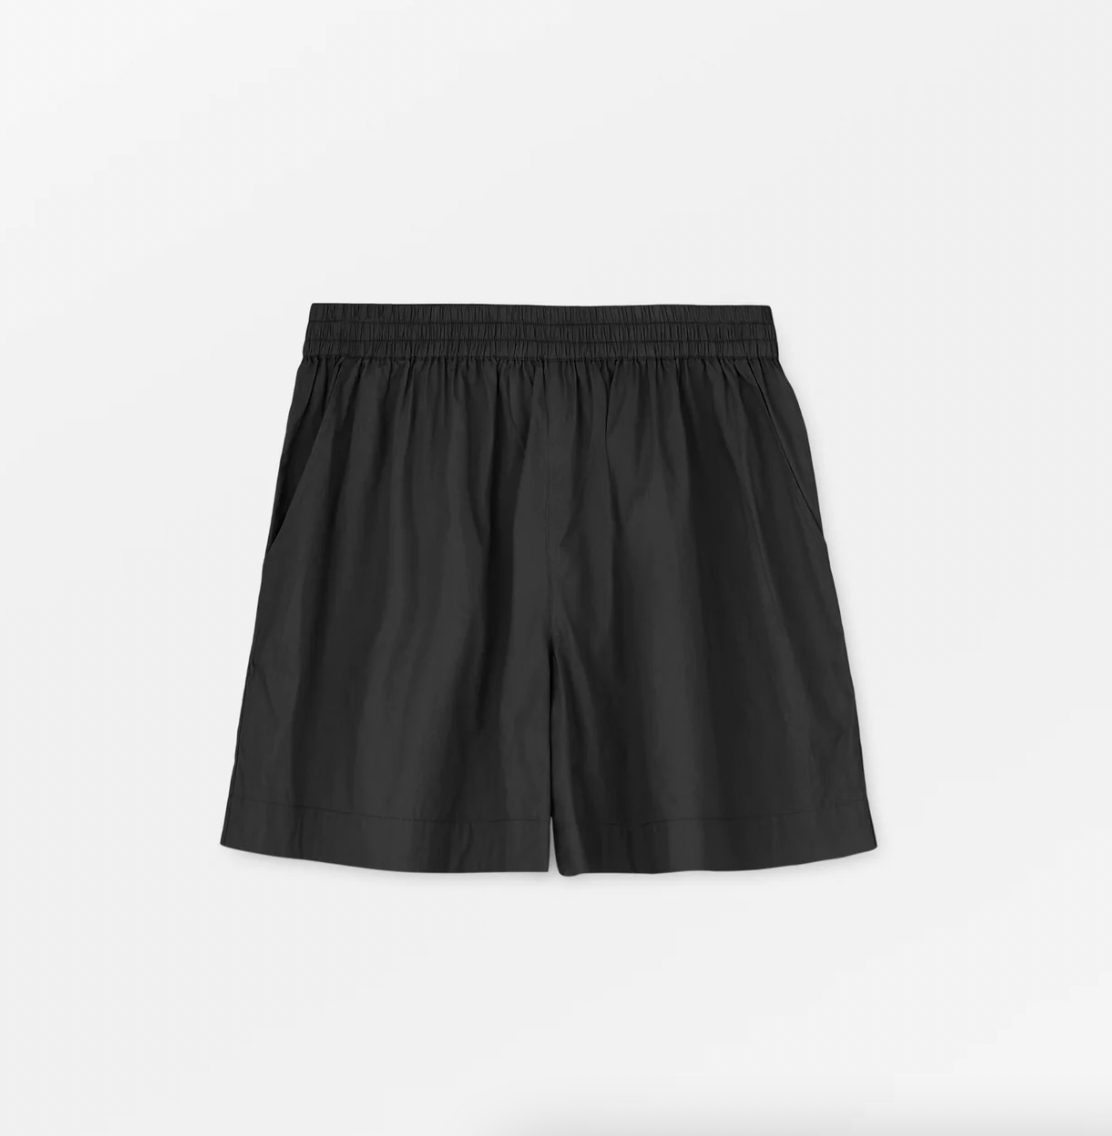 Product Image for Edgar Shorts, Black